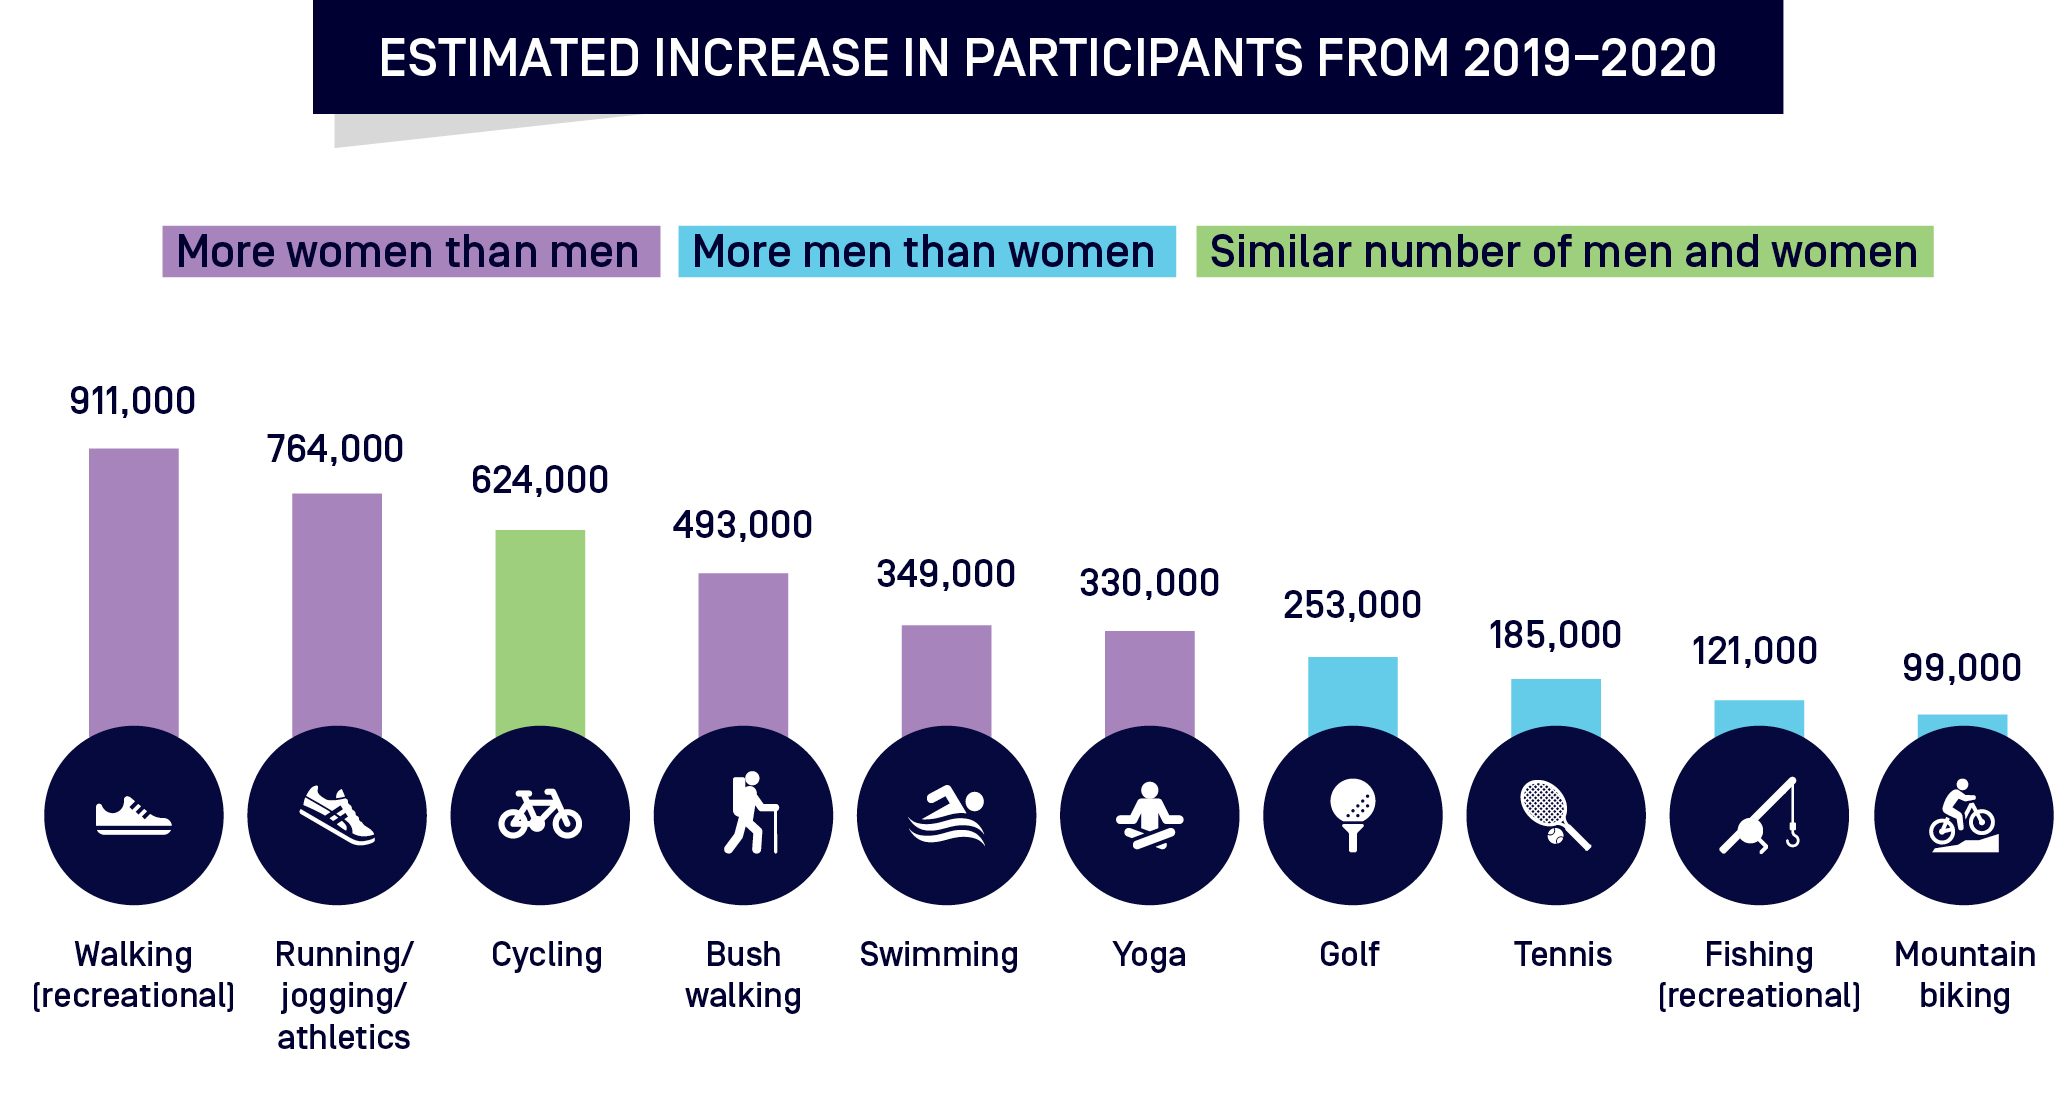 Visual shows estimated increase in participants from 2019–2020 in specific activities: More women than men increased participation in: Walking (recreational): 911,000; Running/jogging/athletics: 764,000; Bush walking: 493,000; Swimming: 349,000; Yoga: 330,000. More men than women increased participation in: Golf: 253,000; Tennis: 185,000; Fishing (recreational):121,000; Mountain biking: 99,000. A similar number of men and women increased participation in Cycling: 624,000.